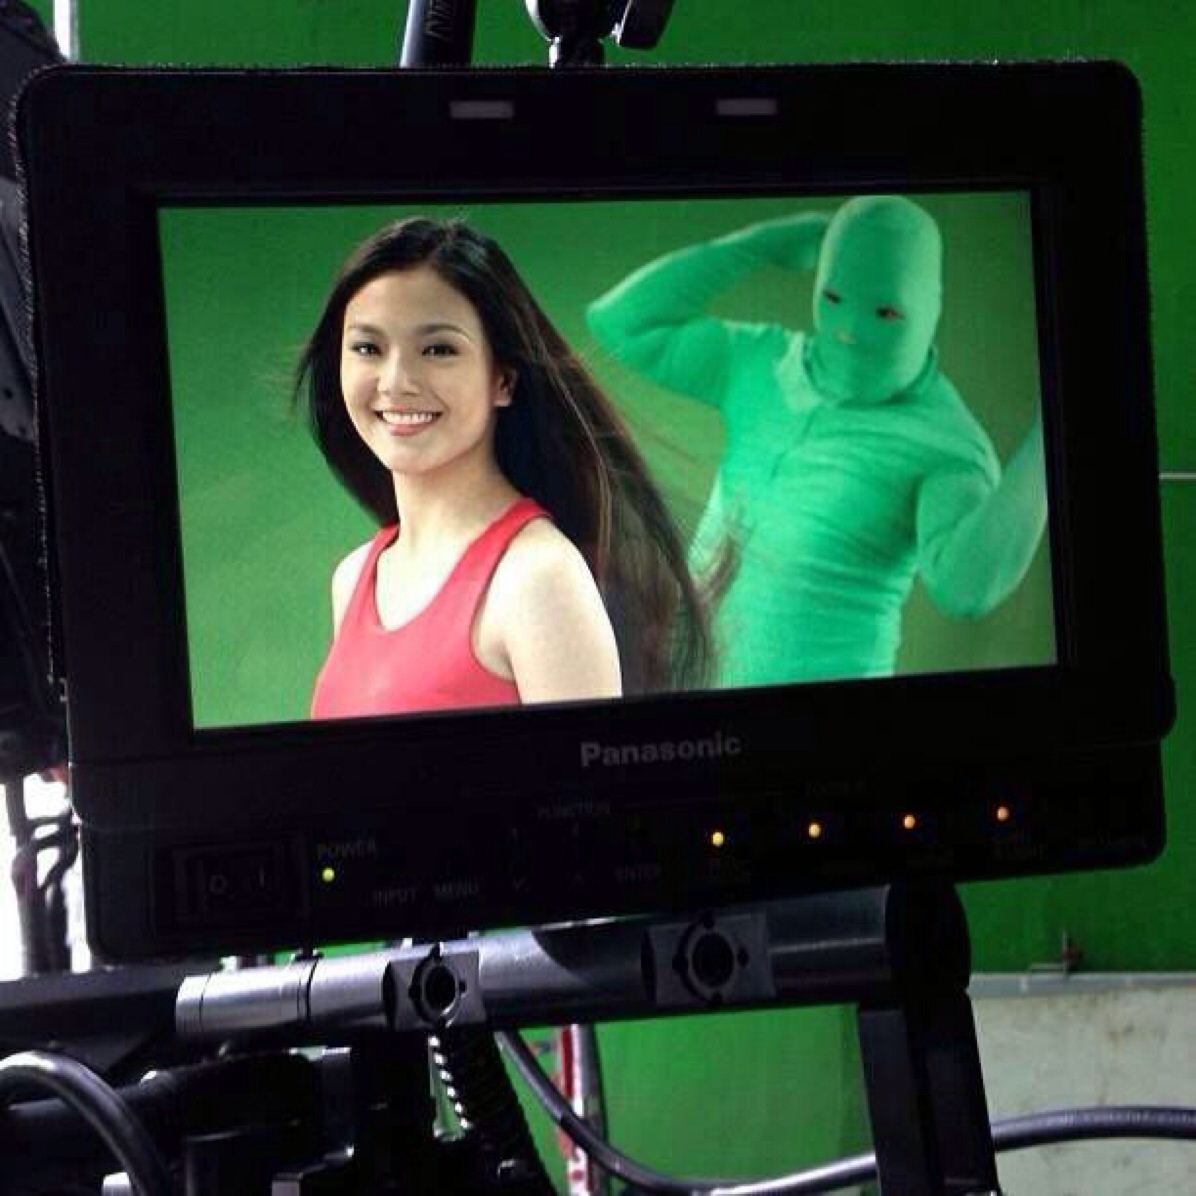 Greenscreen-clad workers who secretly flip models' hair during shampoo commercials